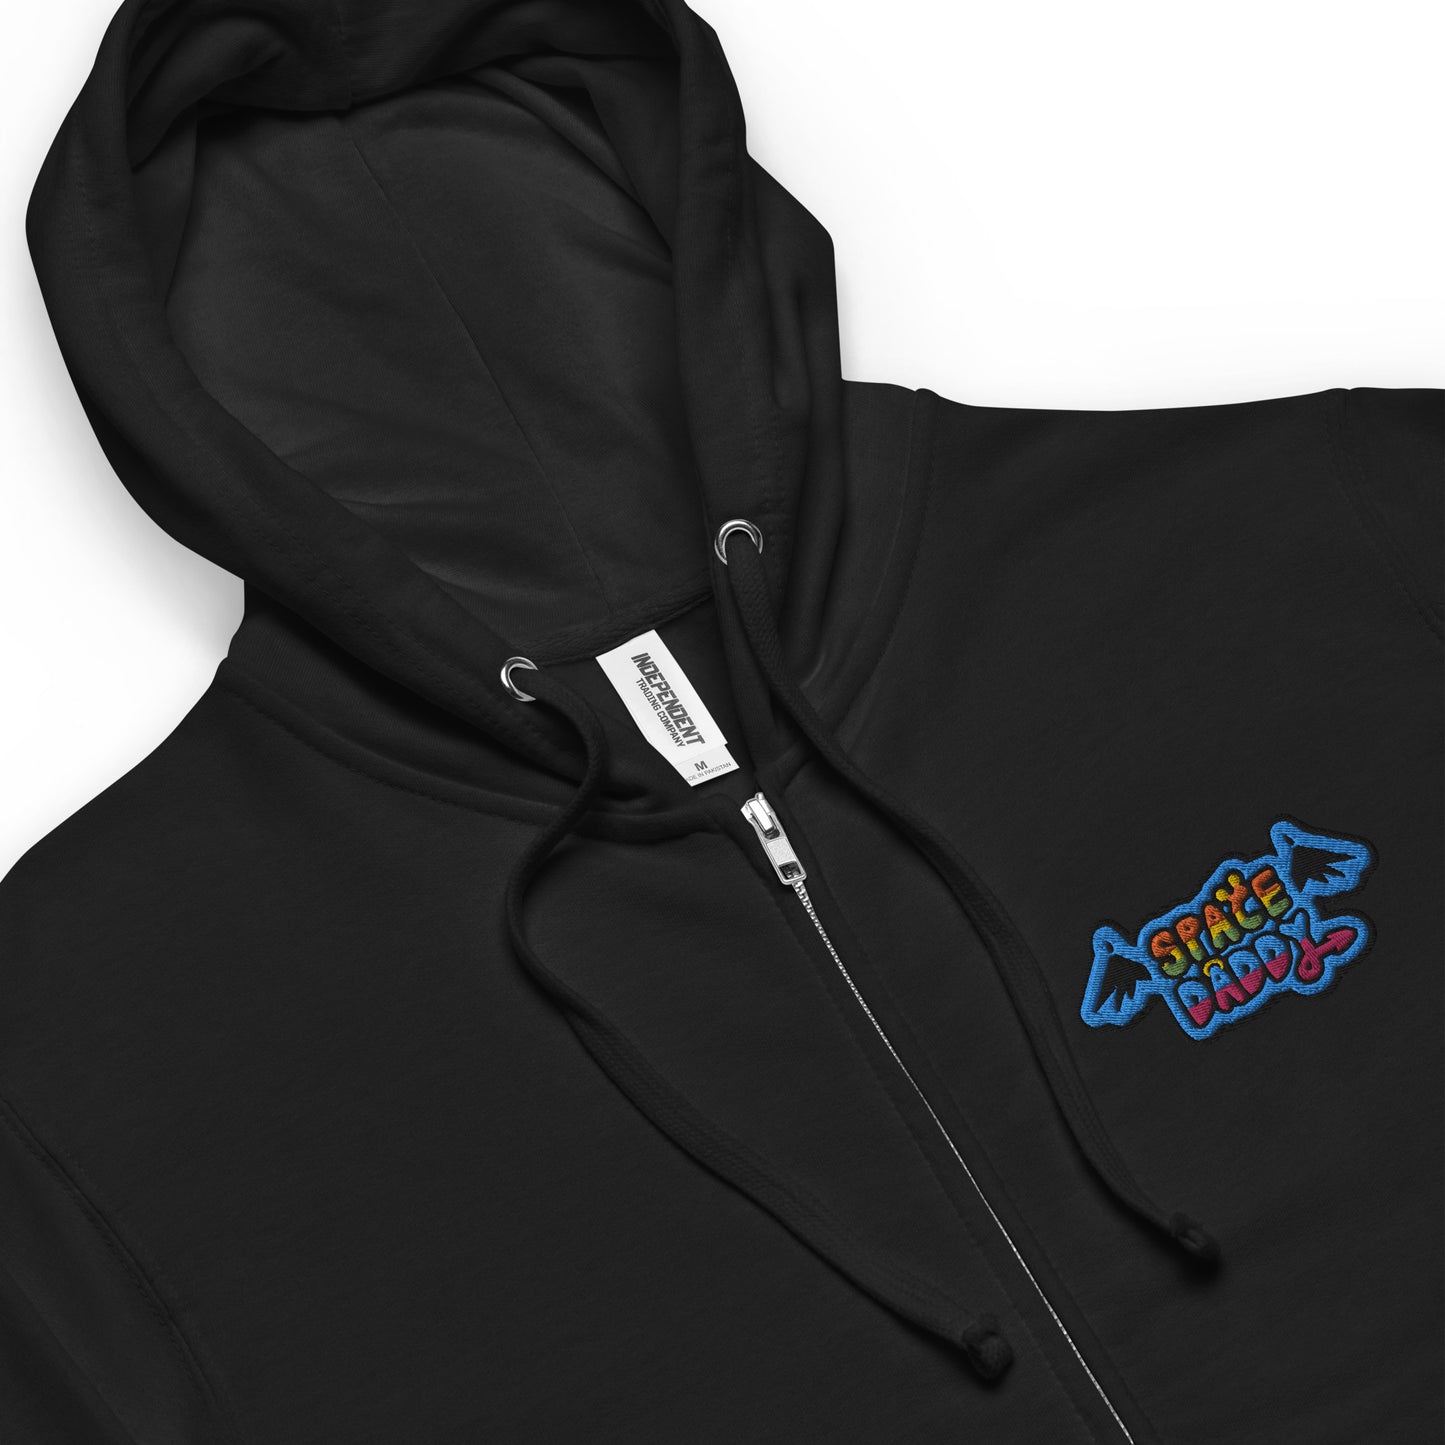 Space Daddy Embroidered Black Zip Hoodie